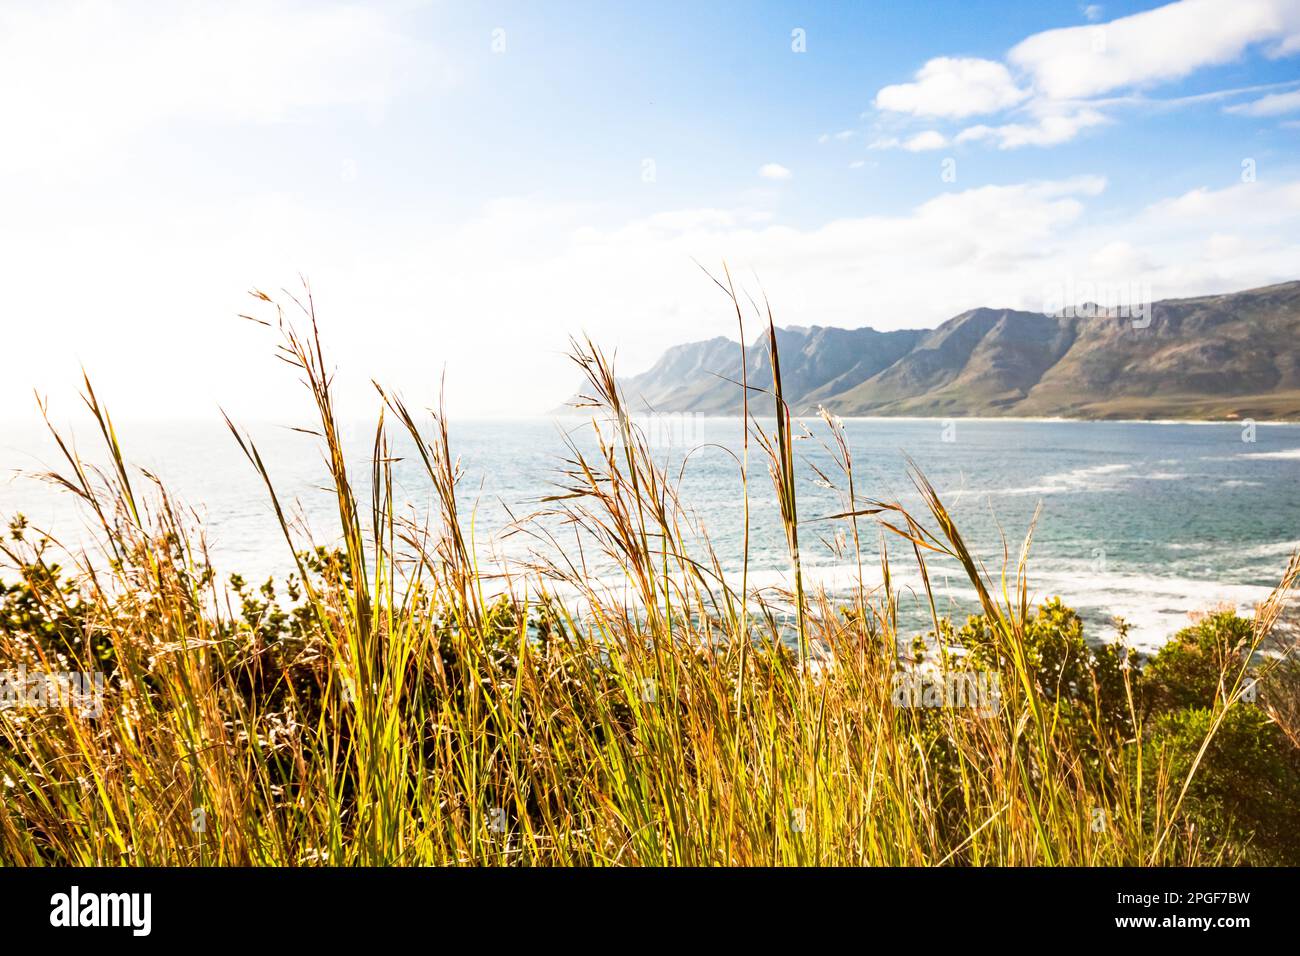 Grass scene with a ocean and mountain landscape Stock Photo